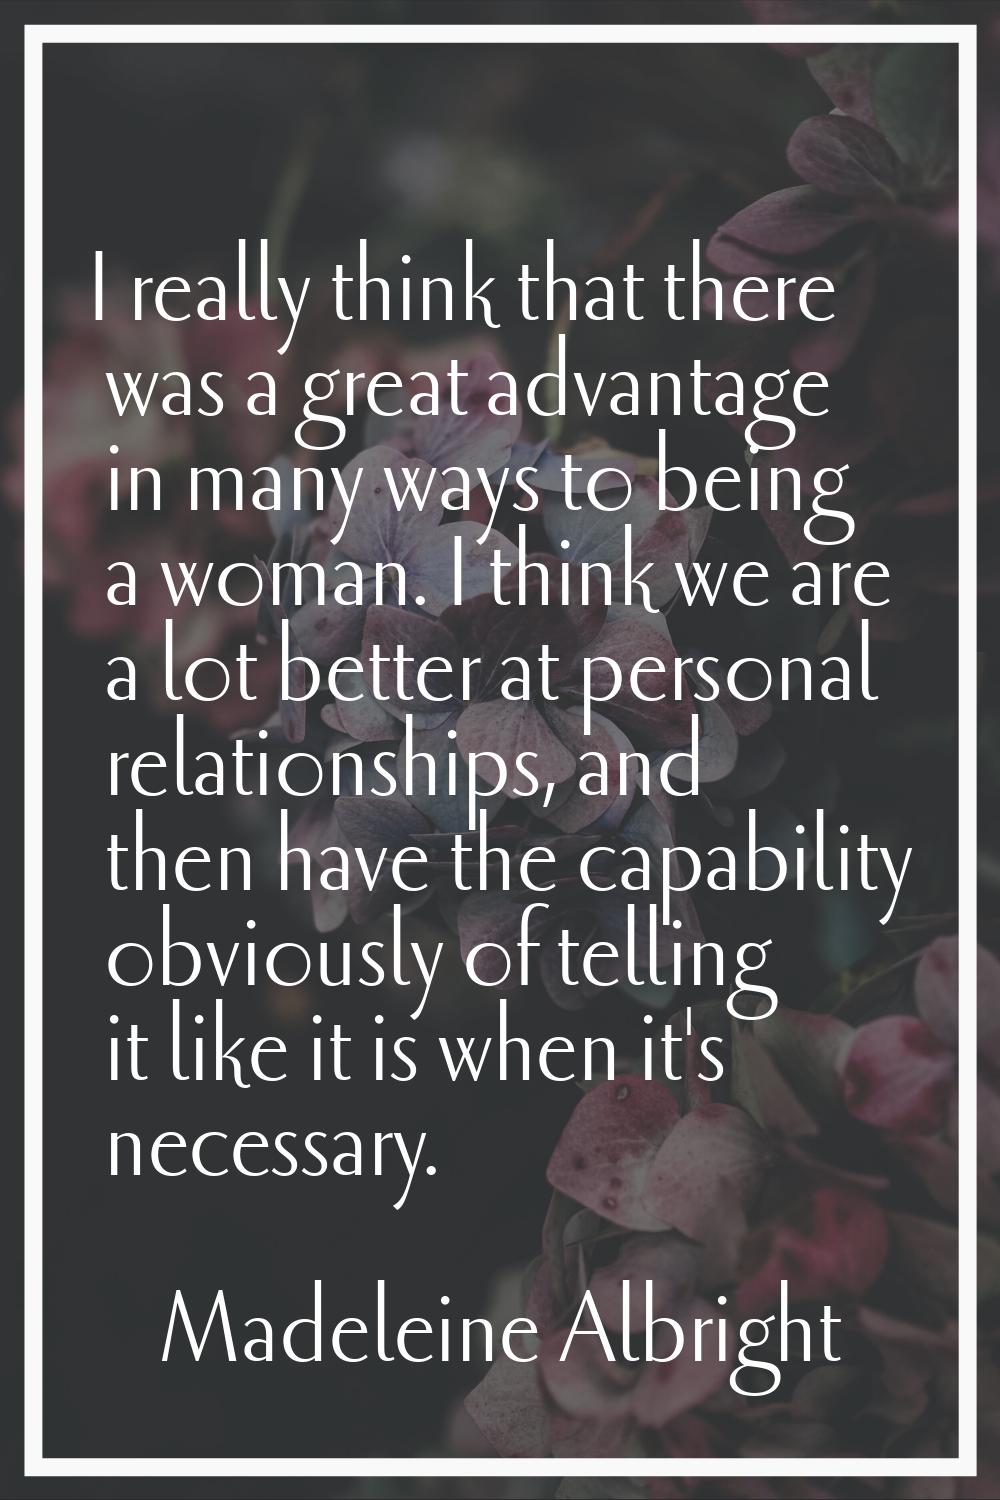 I really think that there was a great advantage in many ways to being a woman. I think we are a lot